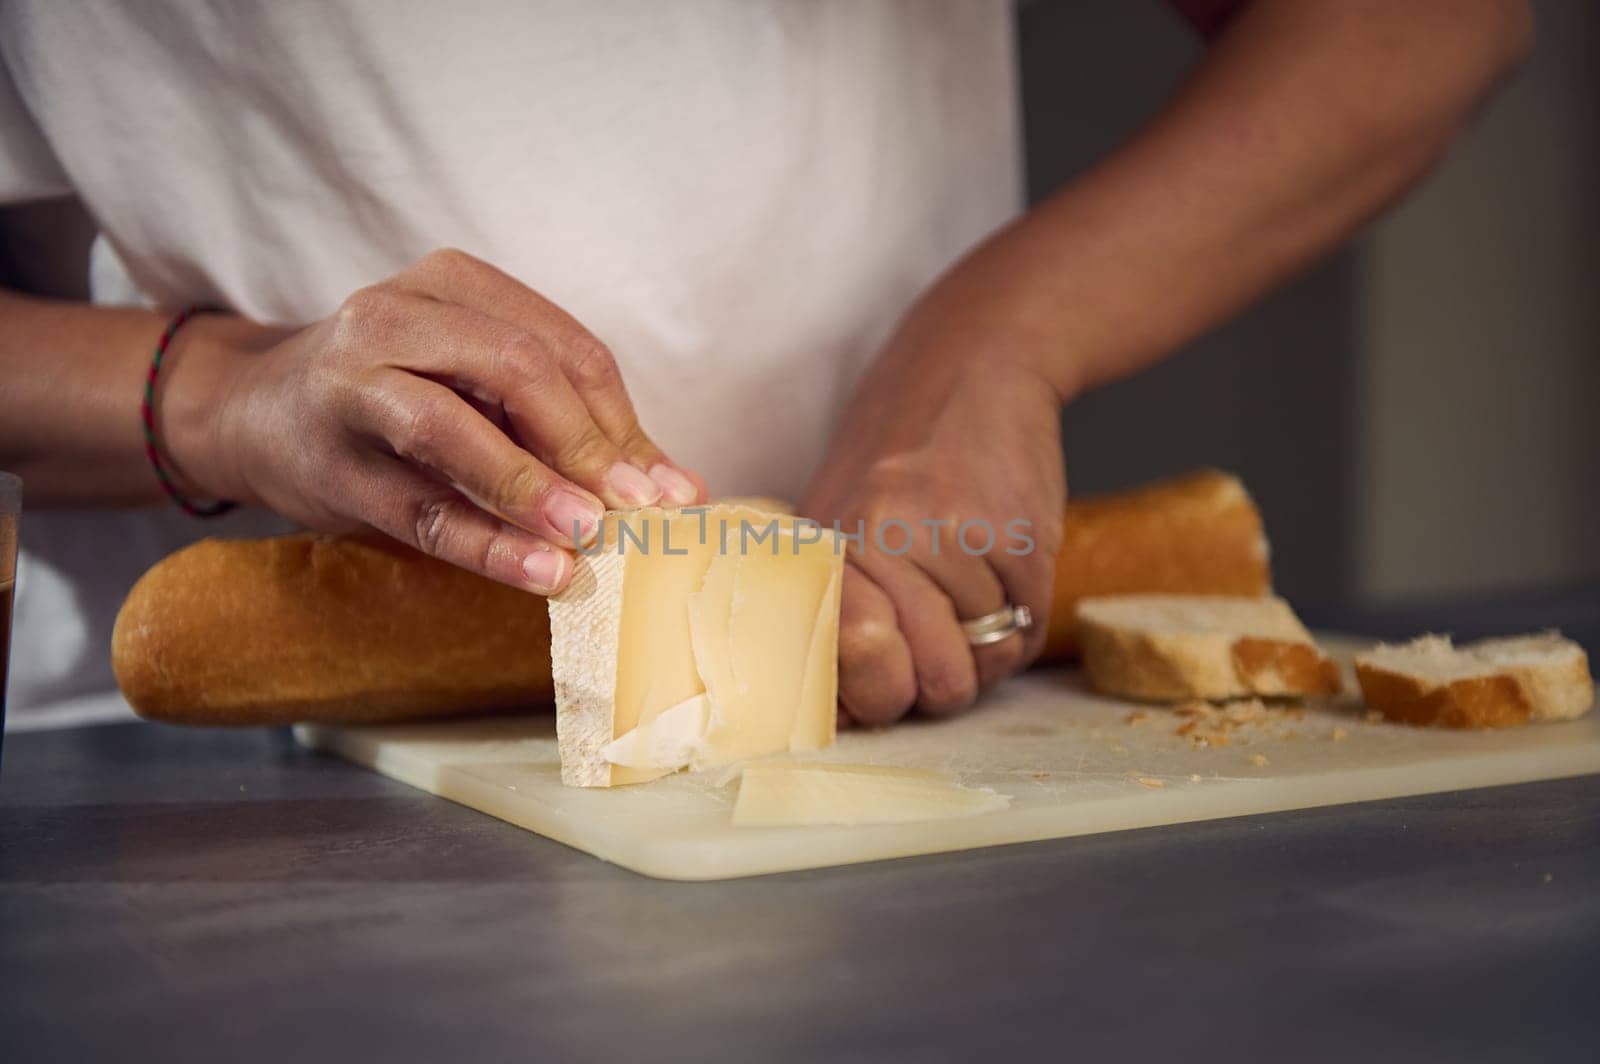 Close-up hands of a woman slicing cheese on cutting board, using a kitchen knife, preparing sandwiches for a healthy breakfast.